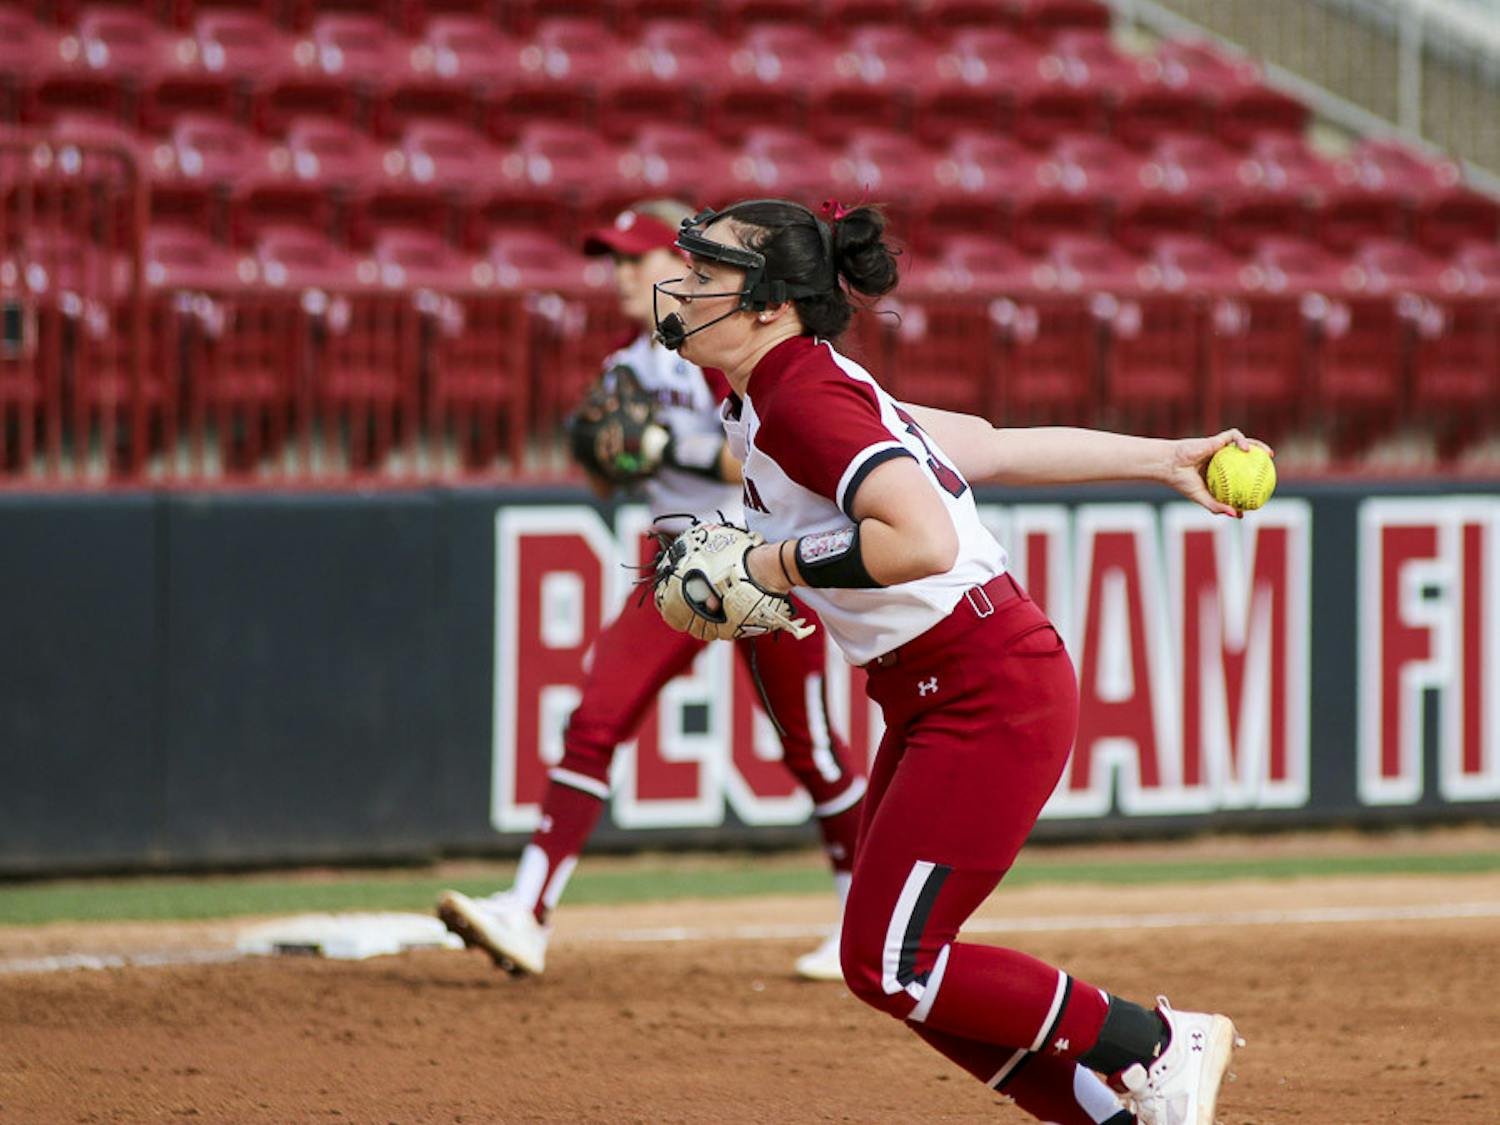 Senior pitcher Karsen Ochs winds up for a pitch during the match against Western Kentucky University at Beckham Field on Feb. 19, 2023. The Gamecocks beat the Hilltoppers 11-2.